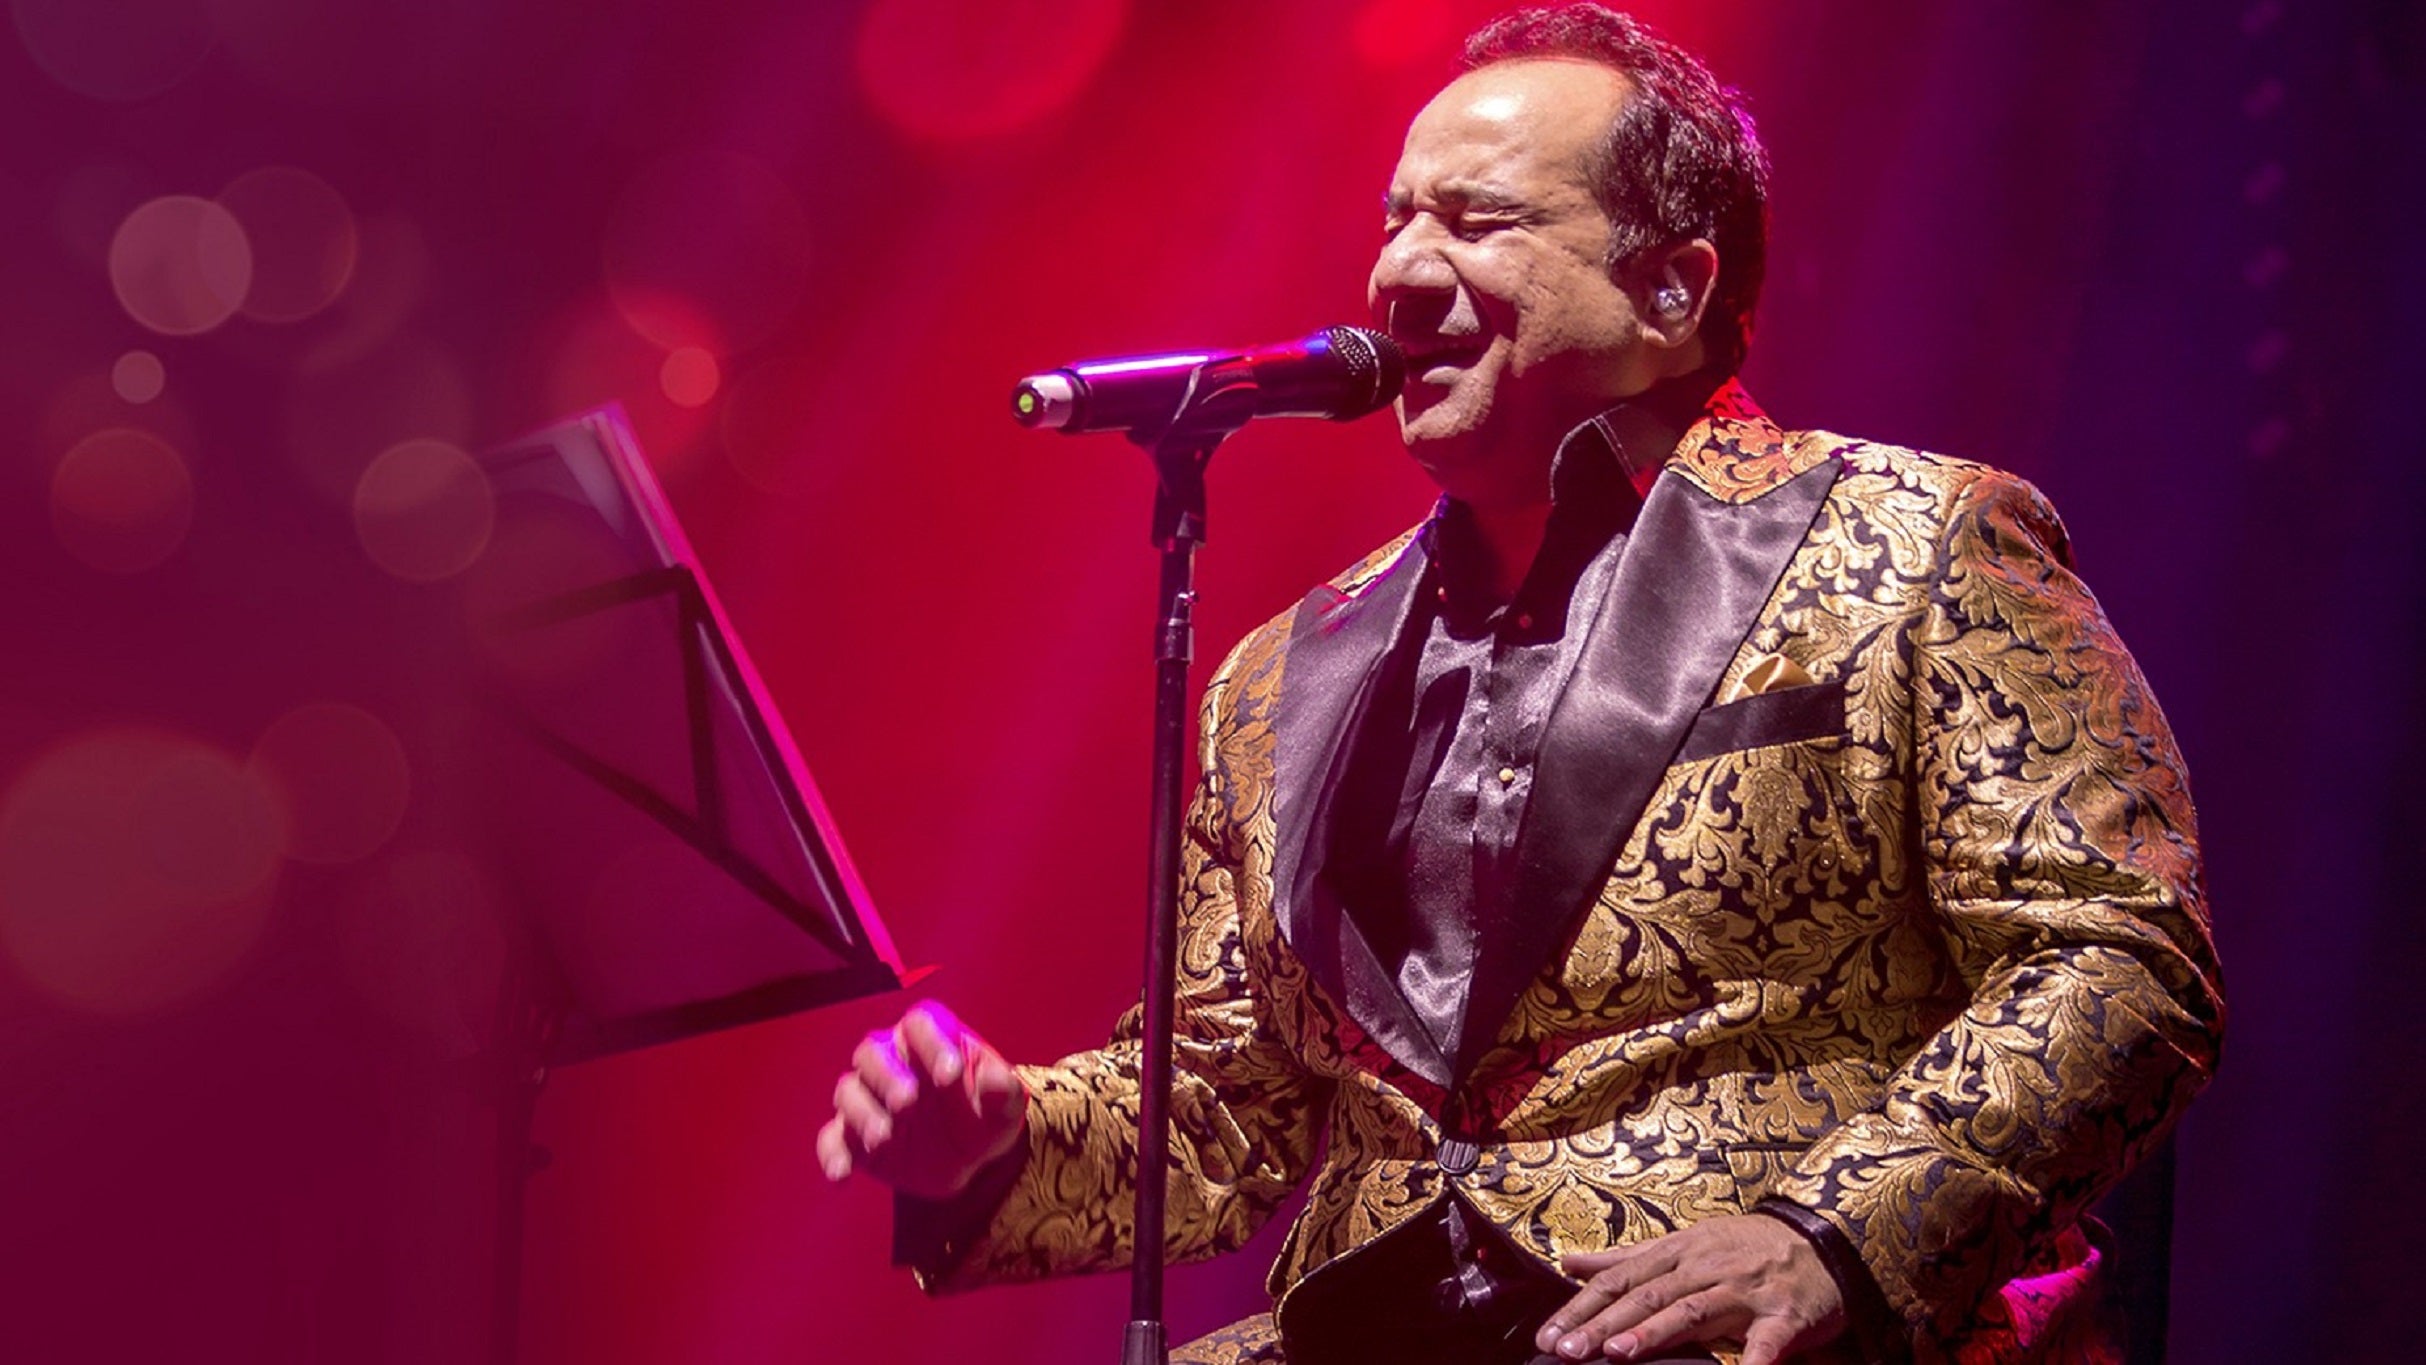 Rahat Fateh Ali Khan presale passcode for show tickets in Irving, TX (The Pavilion at Toyota Music Factory)